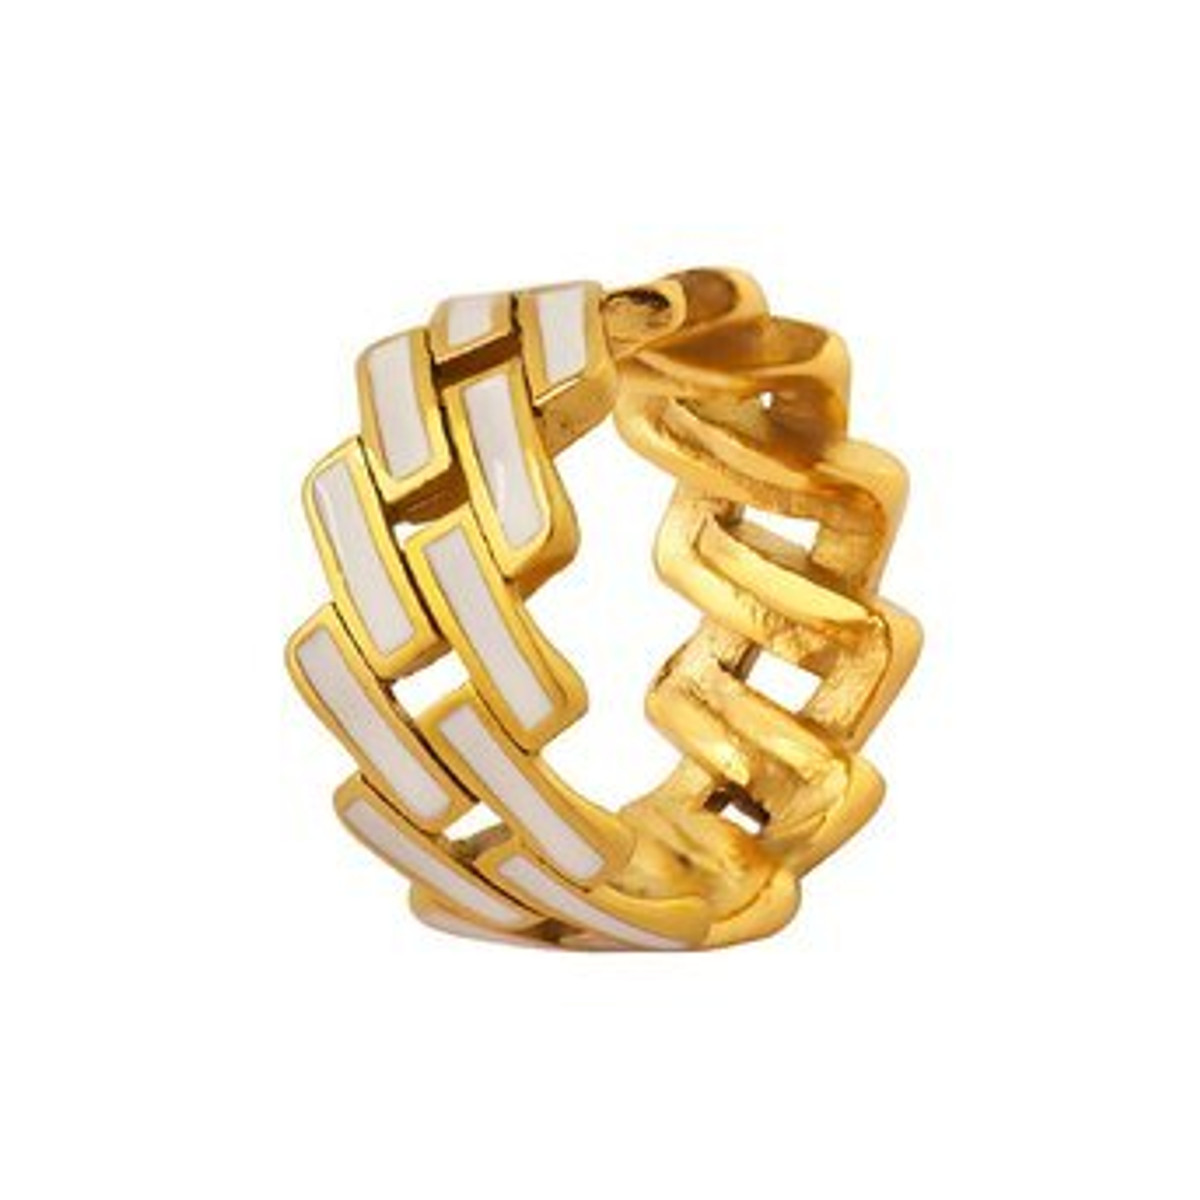 Luster Chevron, 18K gold plated Stainless steel ring